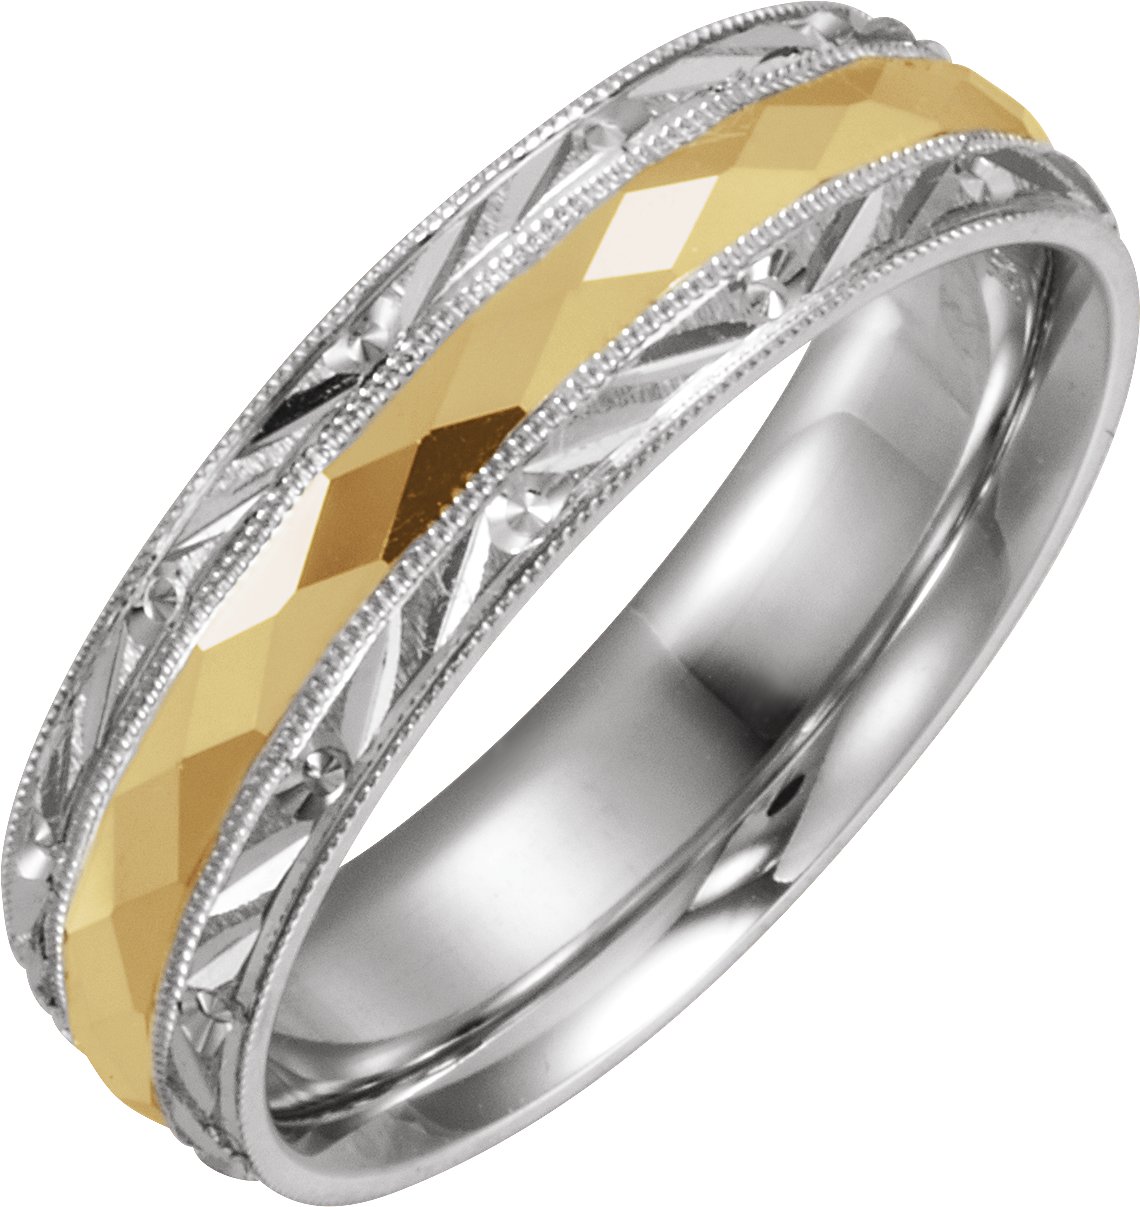 14K White/Yellow 6 mm Design-Engraved Band with Milgrain Size 11